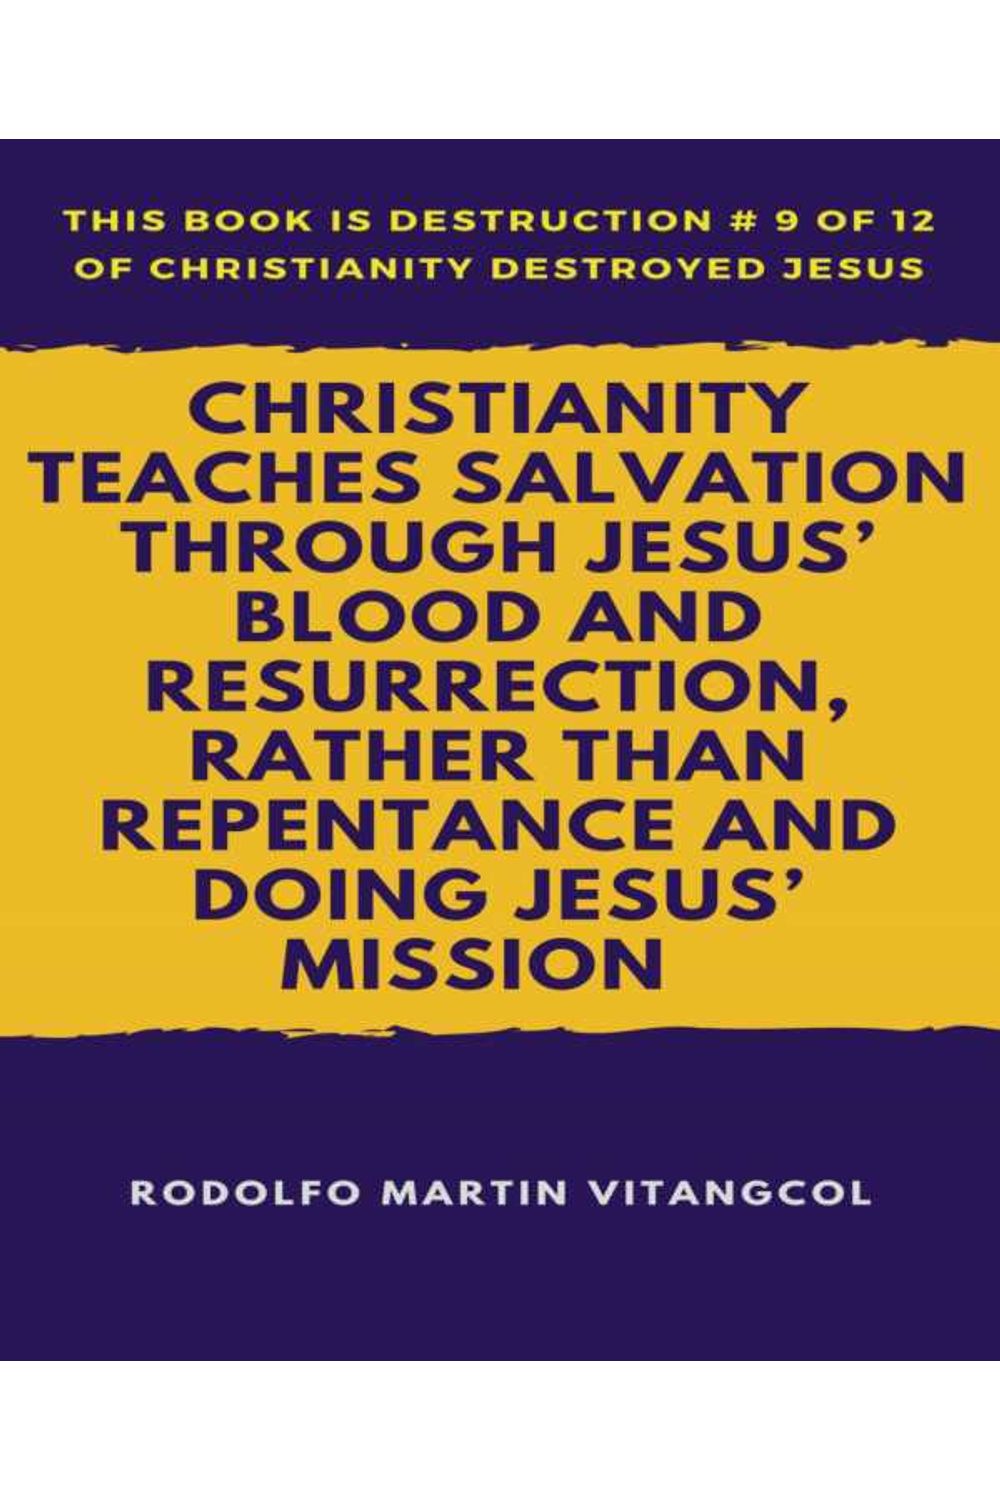 bw-christianity-teaches-salvation-through-jesus-blood-and-resurrection-rather-than-repentance-and-doing-jesus-mission-bookrix-9783743893993